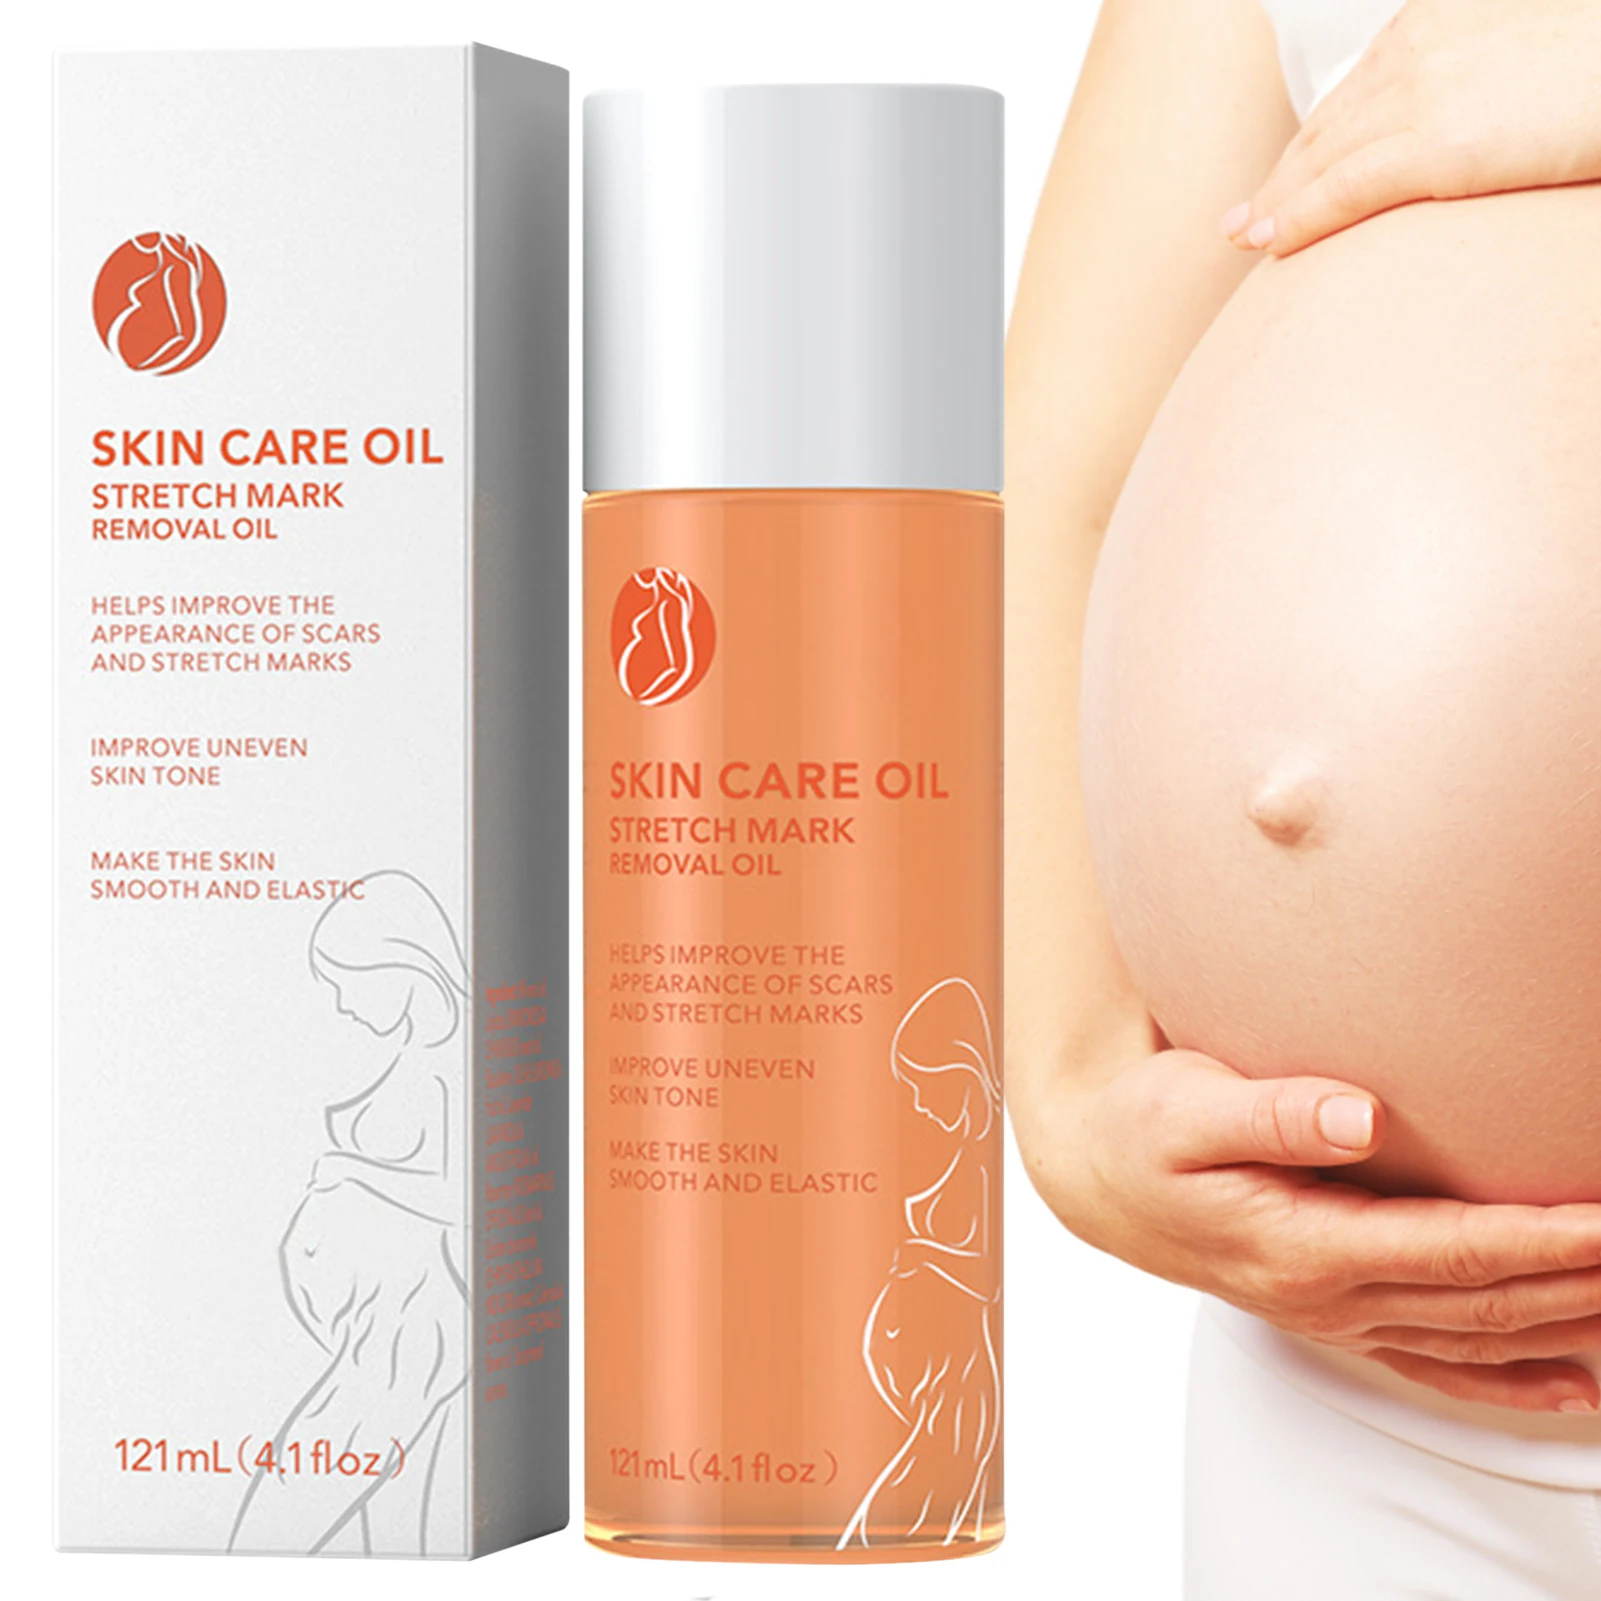 

Natural Belly Oil For Pregnancy With Cocoa Butter Oil Almond Oil For Skin Alternative To Stretch Mark Cream For Pregnancy 2022